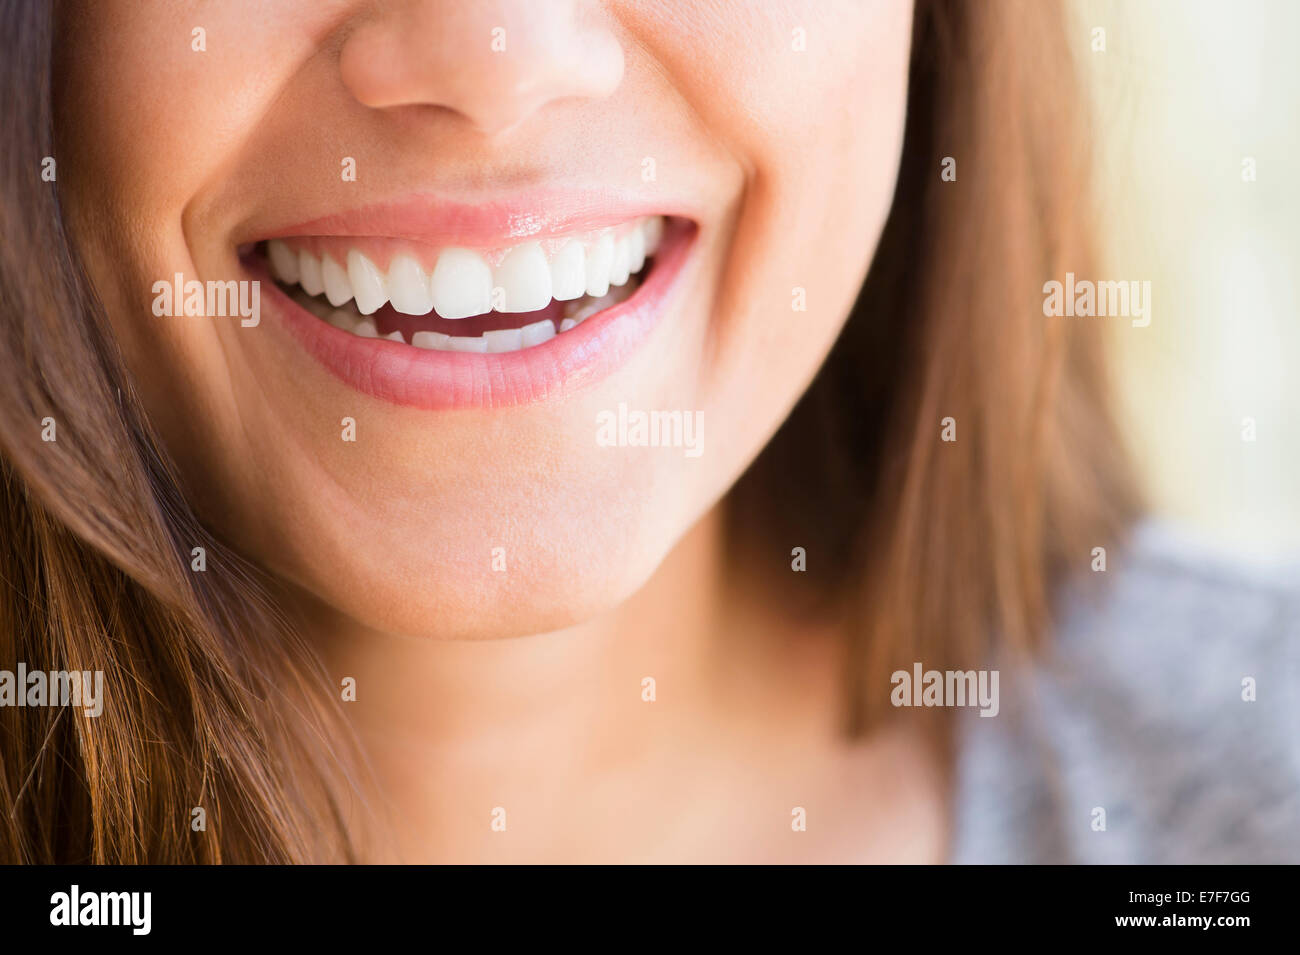 Close up of woman's smile Stock Photo